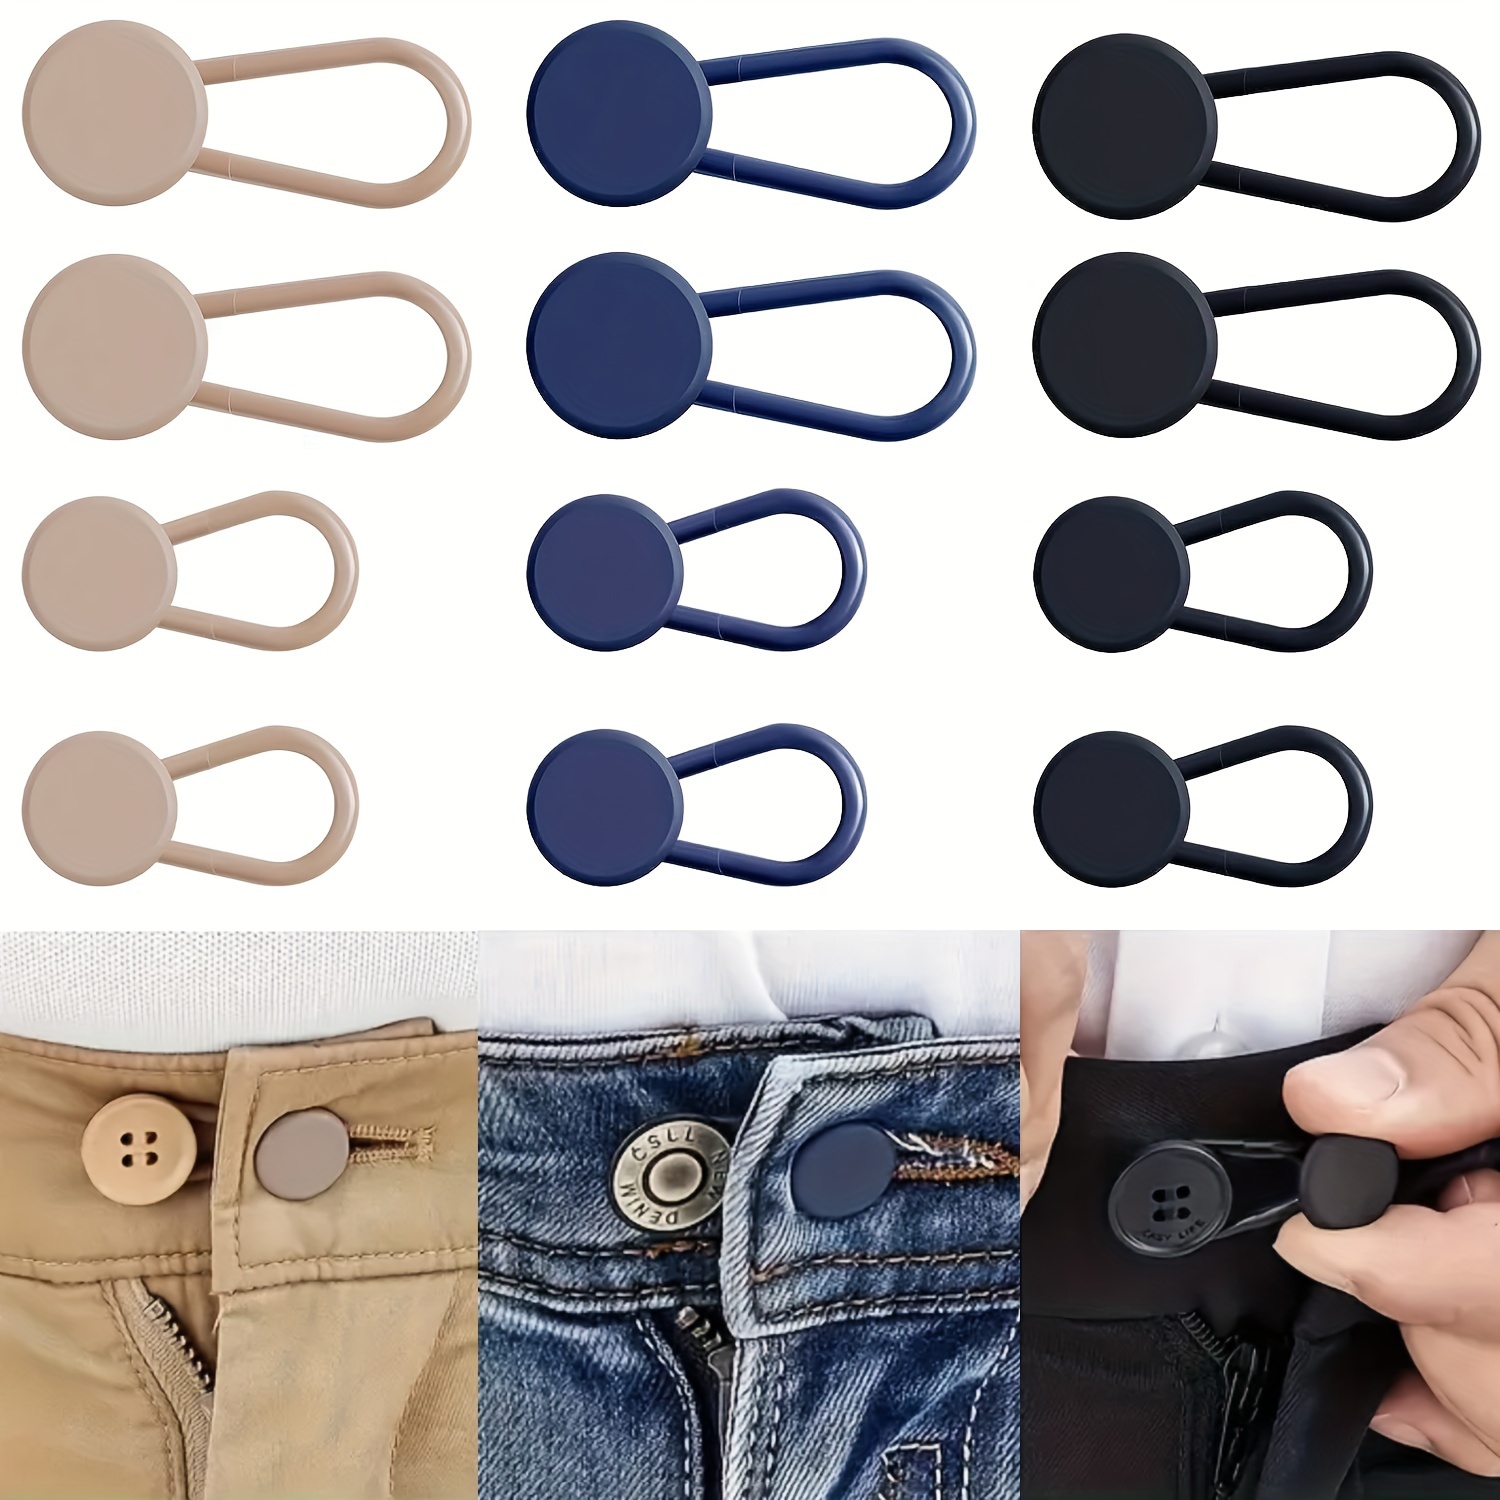 

12-piece No-sew Jean Waist Extenders - Adjustable Pants Button Expanders, Adds 1-1.4 Inches, Unisex, In Khaki/blue/black